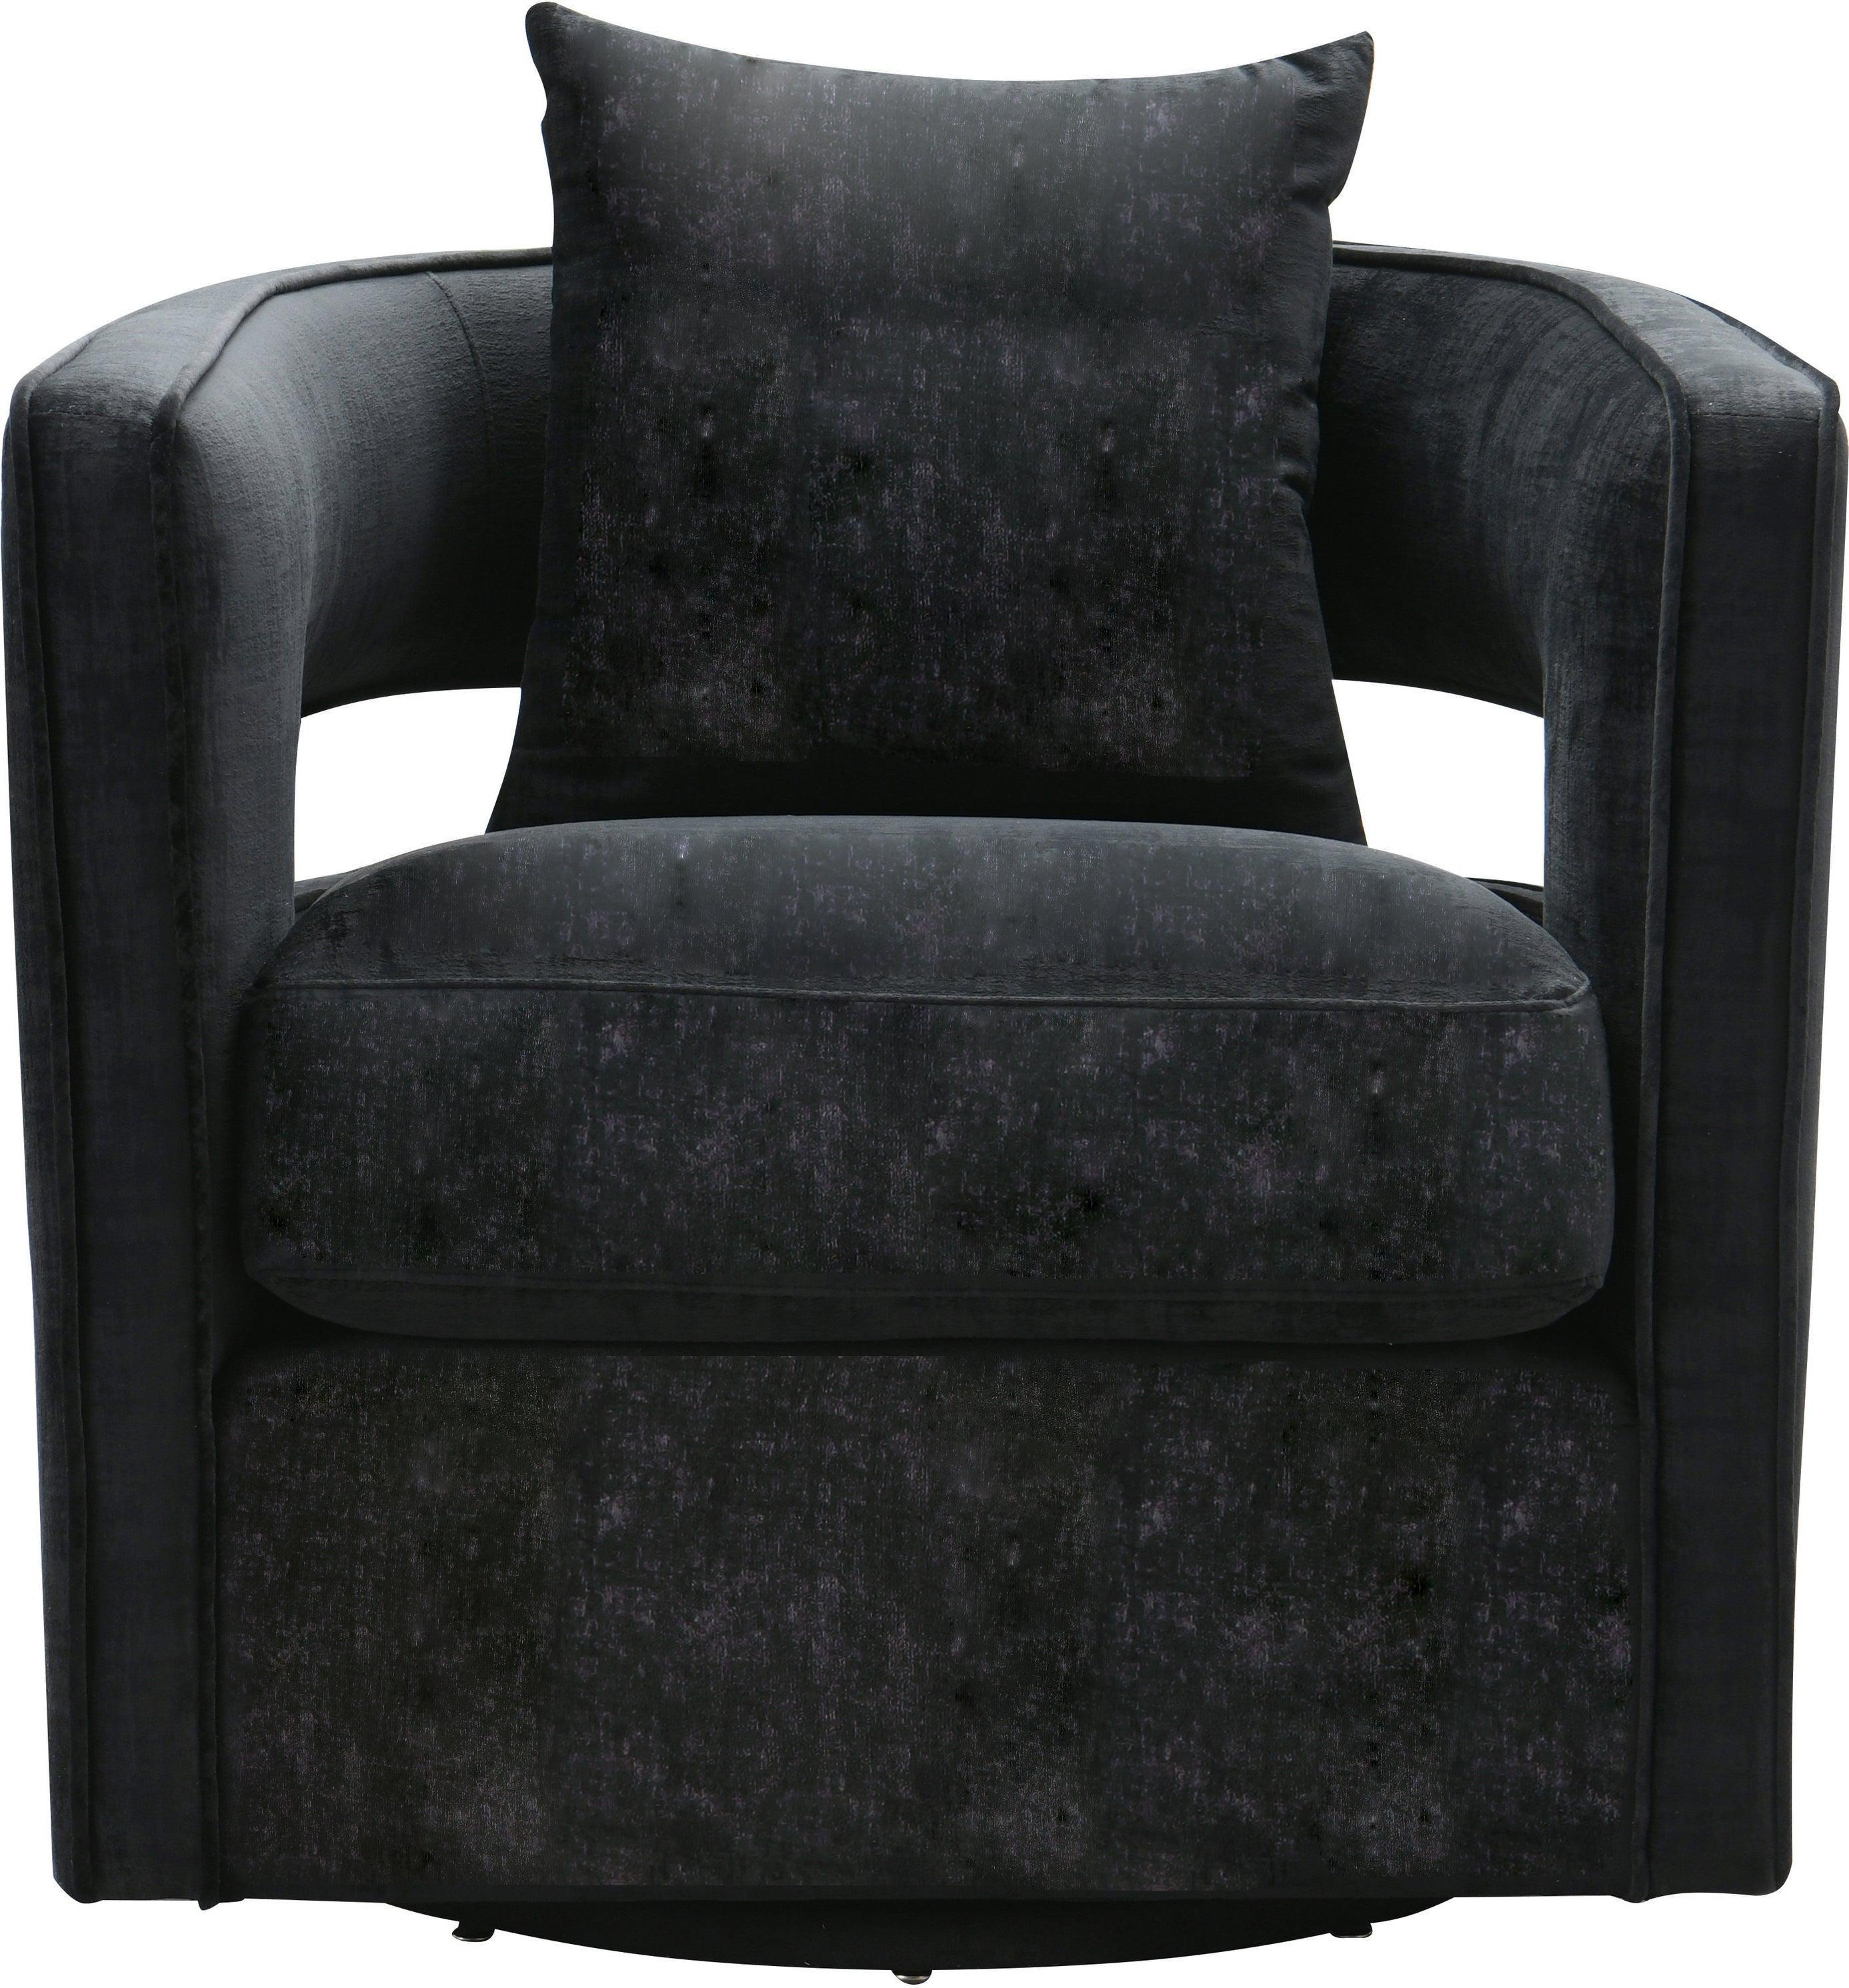 Tov Furniture Accent Chairs - Kennedy Swivel Chair Black